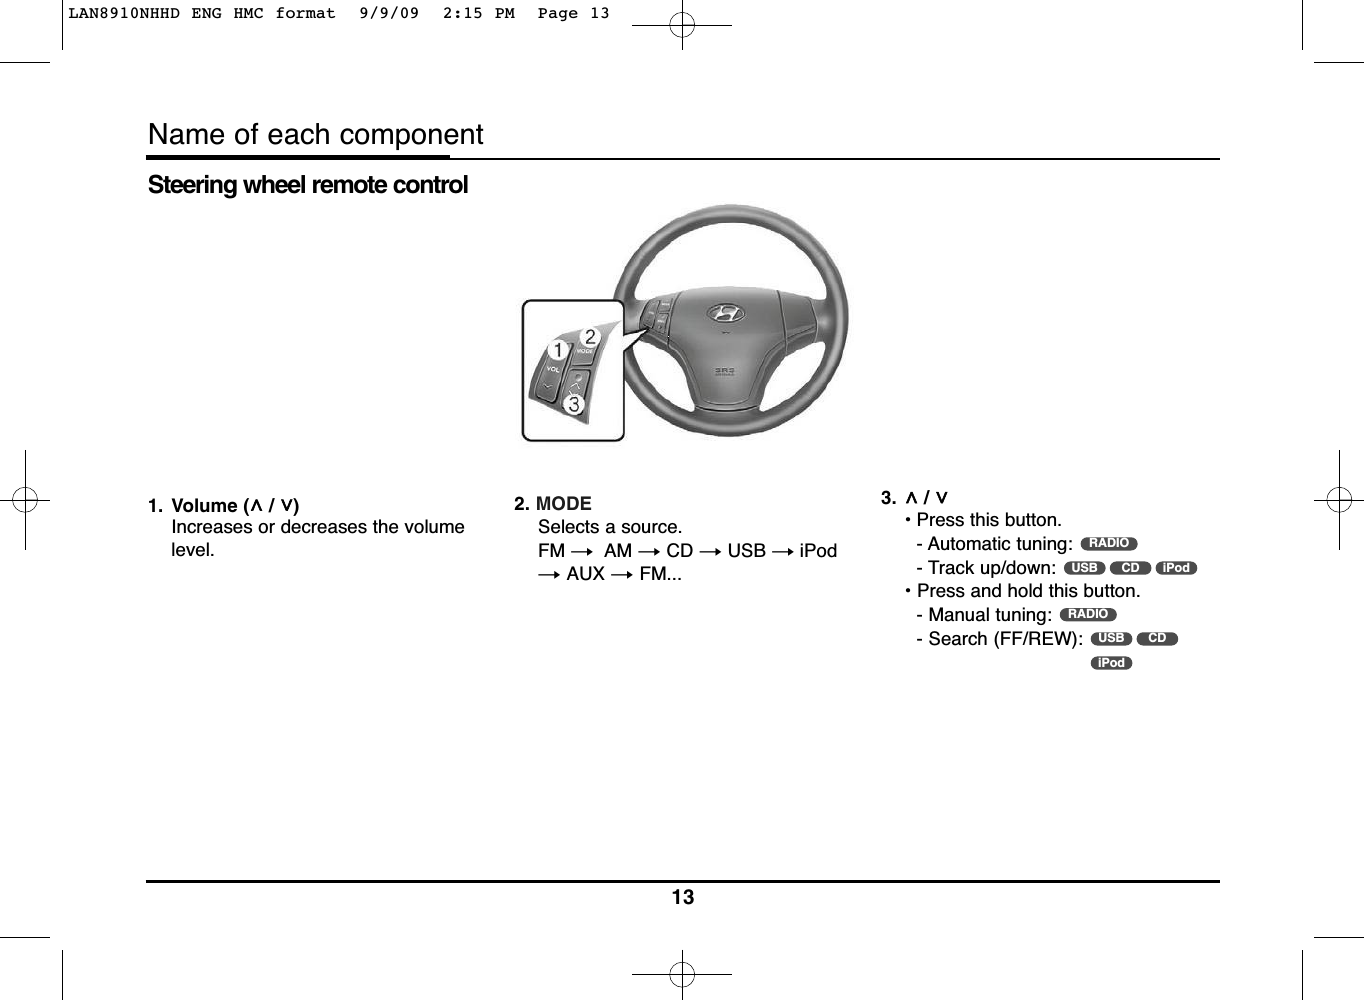 Steering wheel remote control1. Volume (U / u)Increases or decreases the volumelevel.2. MODESelects a source.FM t  AM t CD tUSB tiPodt AUX t FM...3.U / u• Press this button.- Automatic tuning: - Track up/down: • Press and hold this button.- Manual tuning: - Search (FF/REW): iPodCDUSBRADIOiPodCDUSBRADIO13Name of each componentLAN8910NHHD ENG HMC format  9/9/09  2:15 PM  Page 13